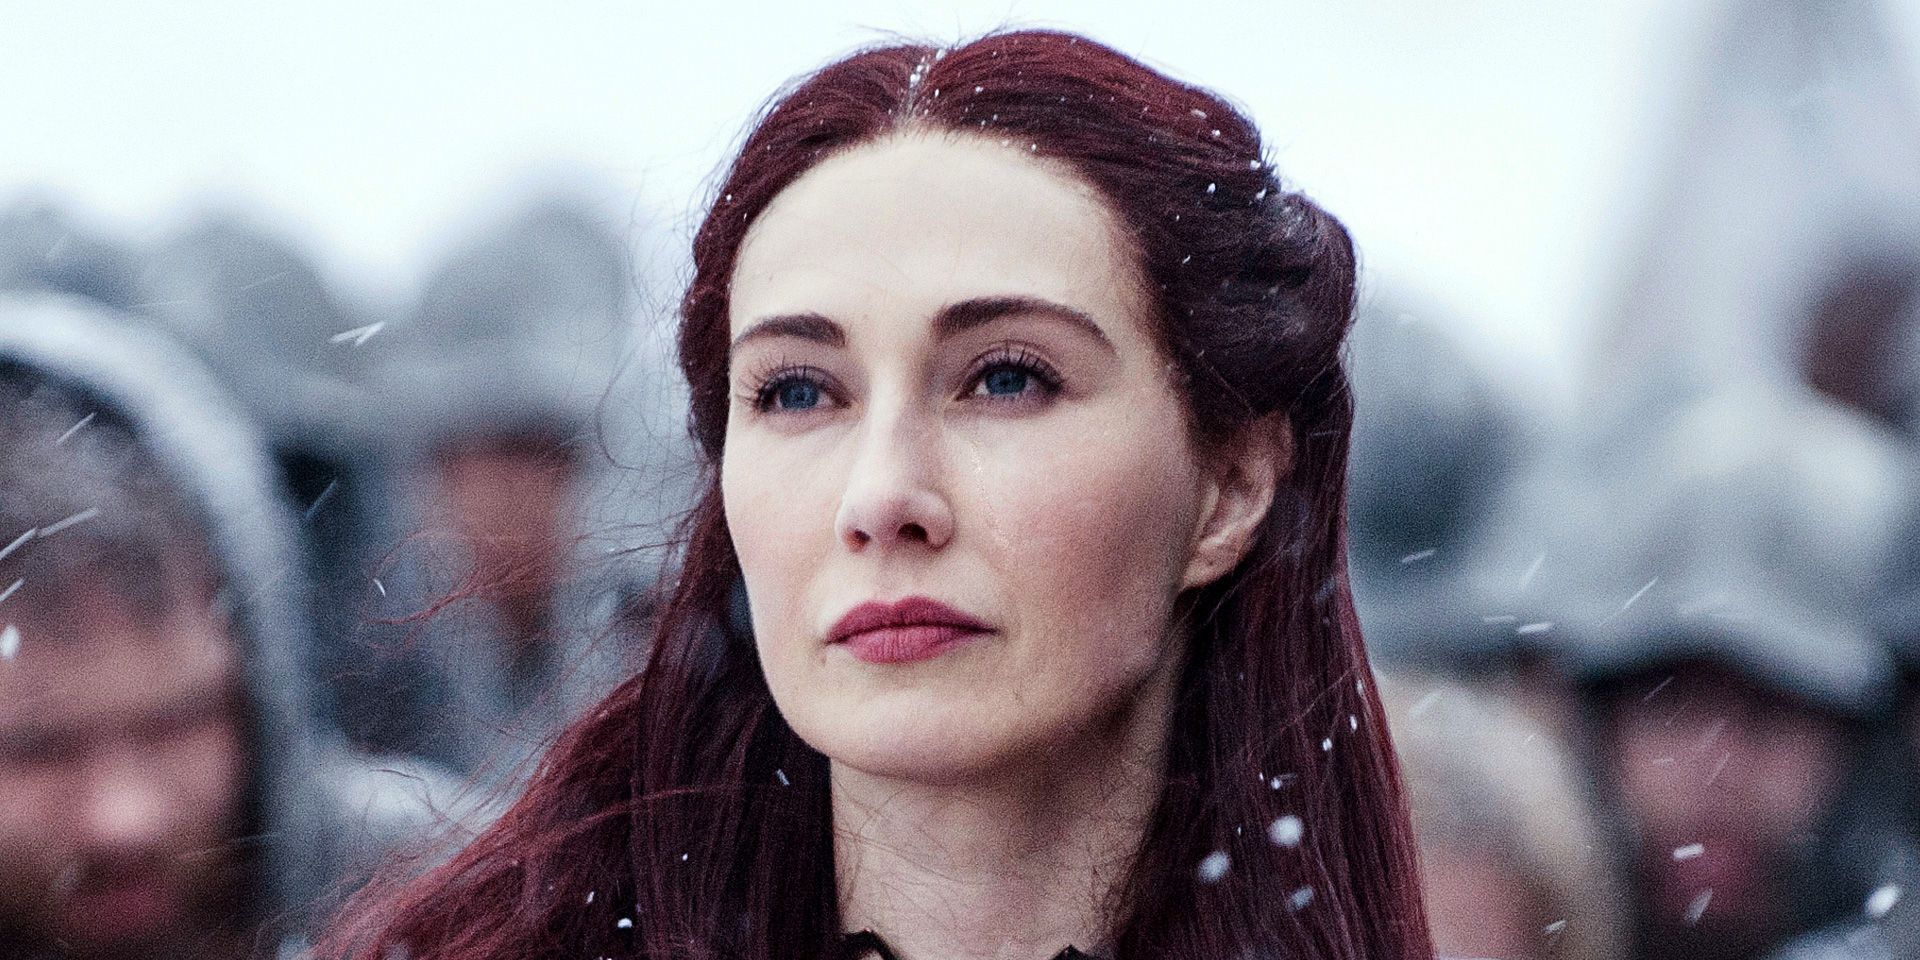 Melisandre in the Snow - Game of Thrones